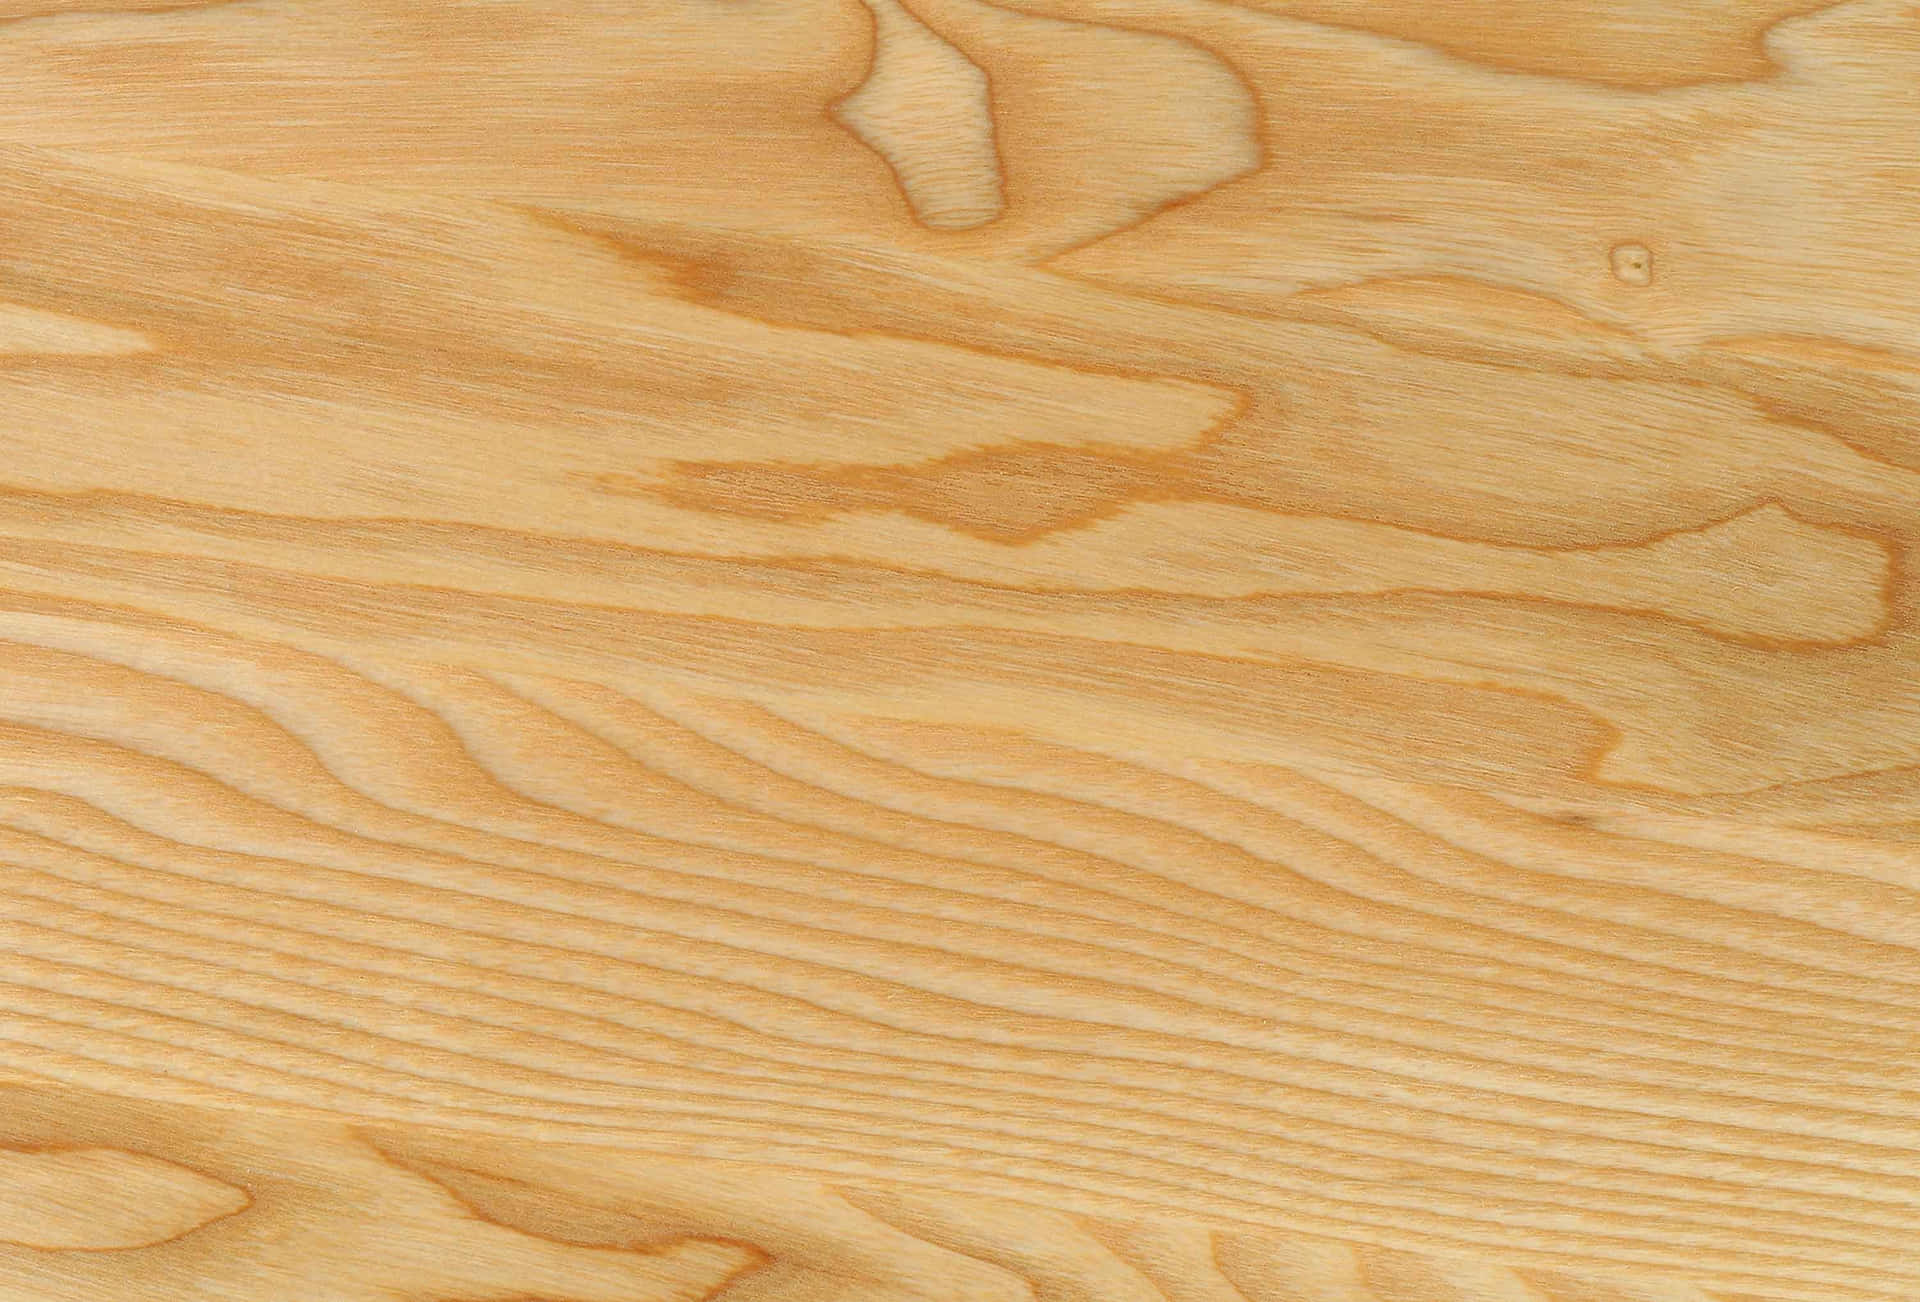 A natural wooden background in light tones